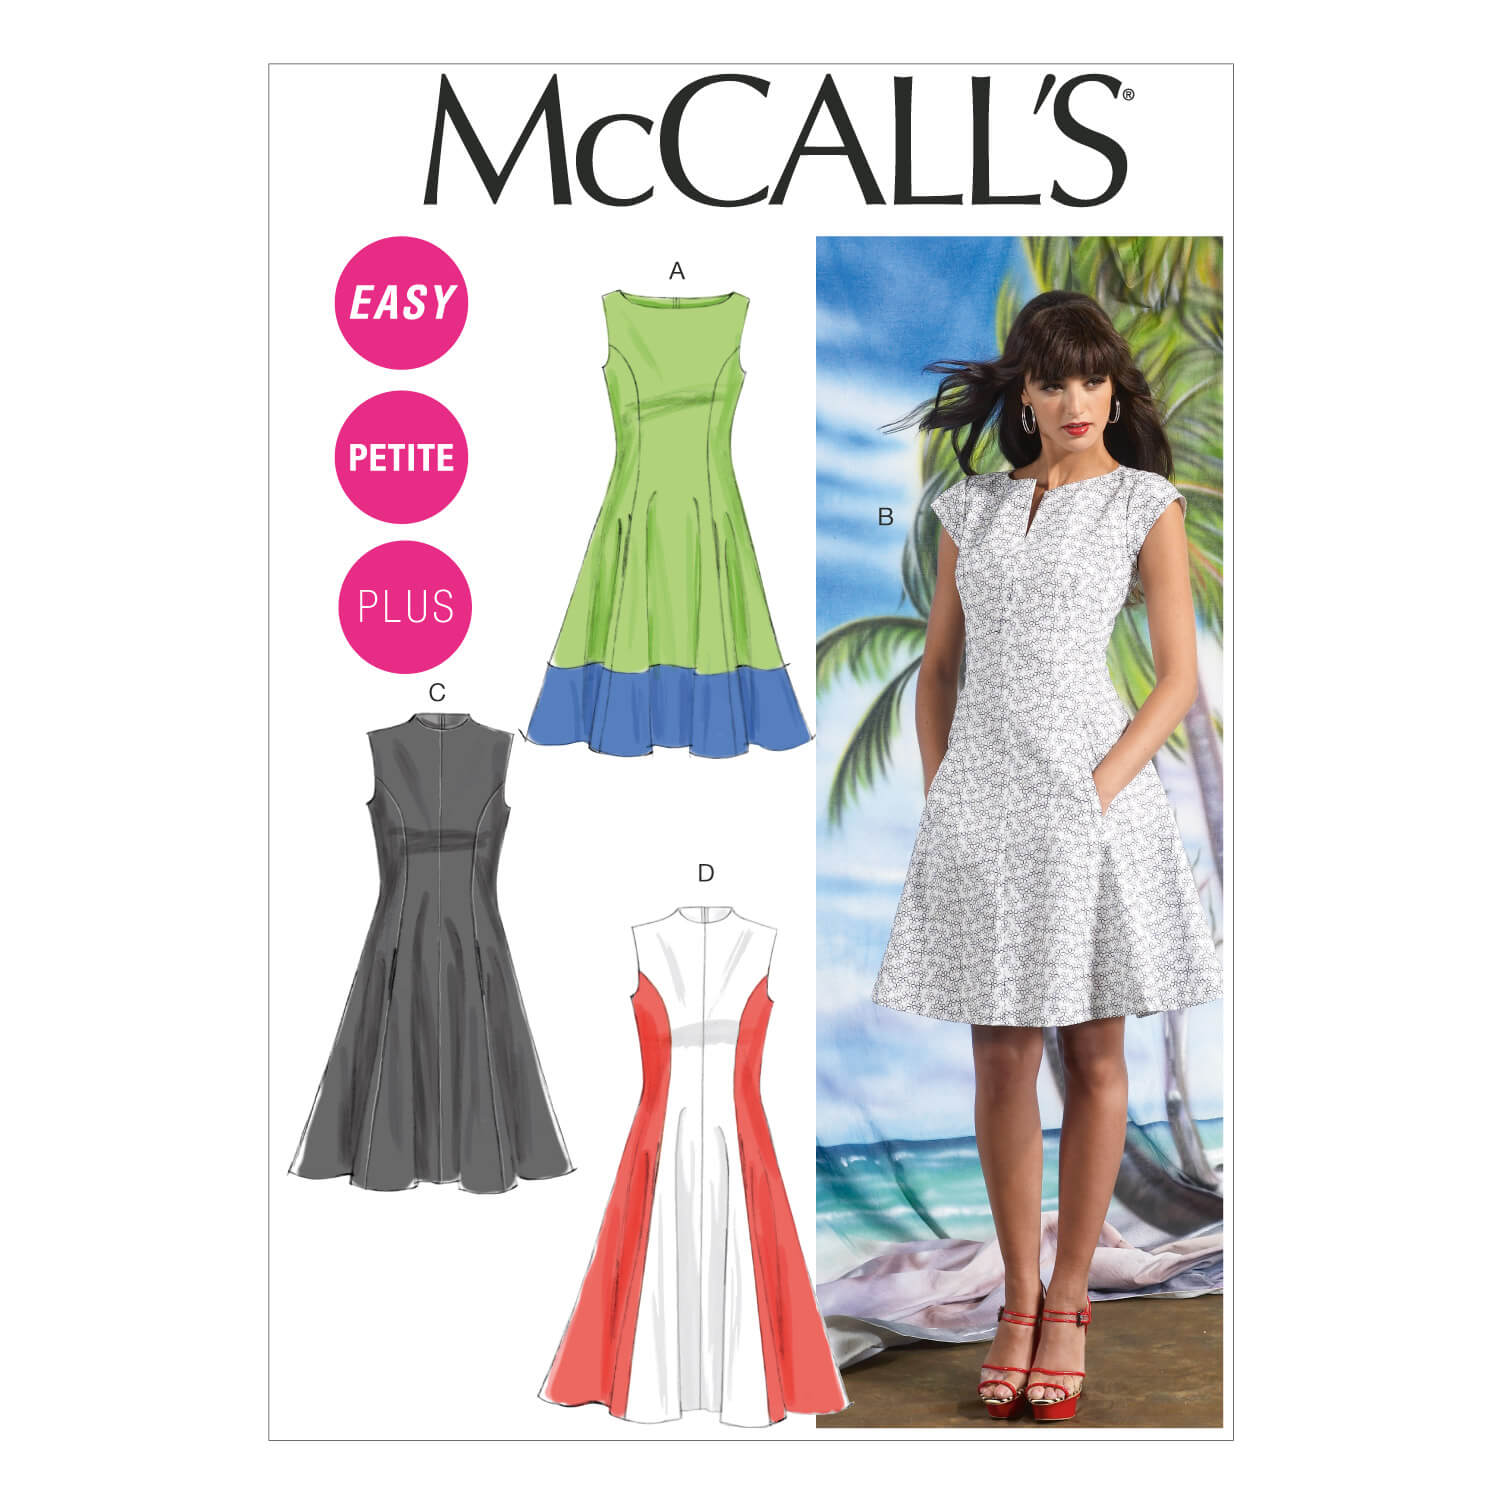 McCall's Sewing Pattern M6741 Misses'/Women's Petite Lined Dresses